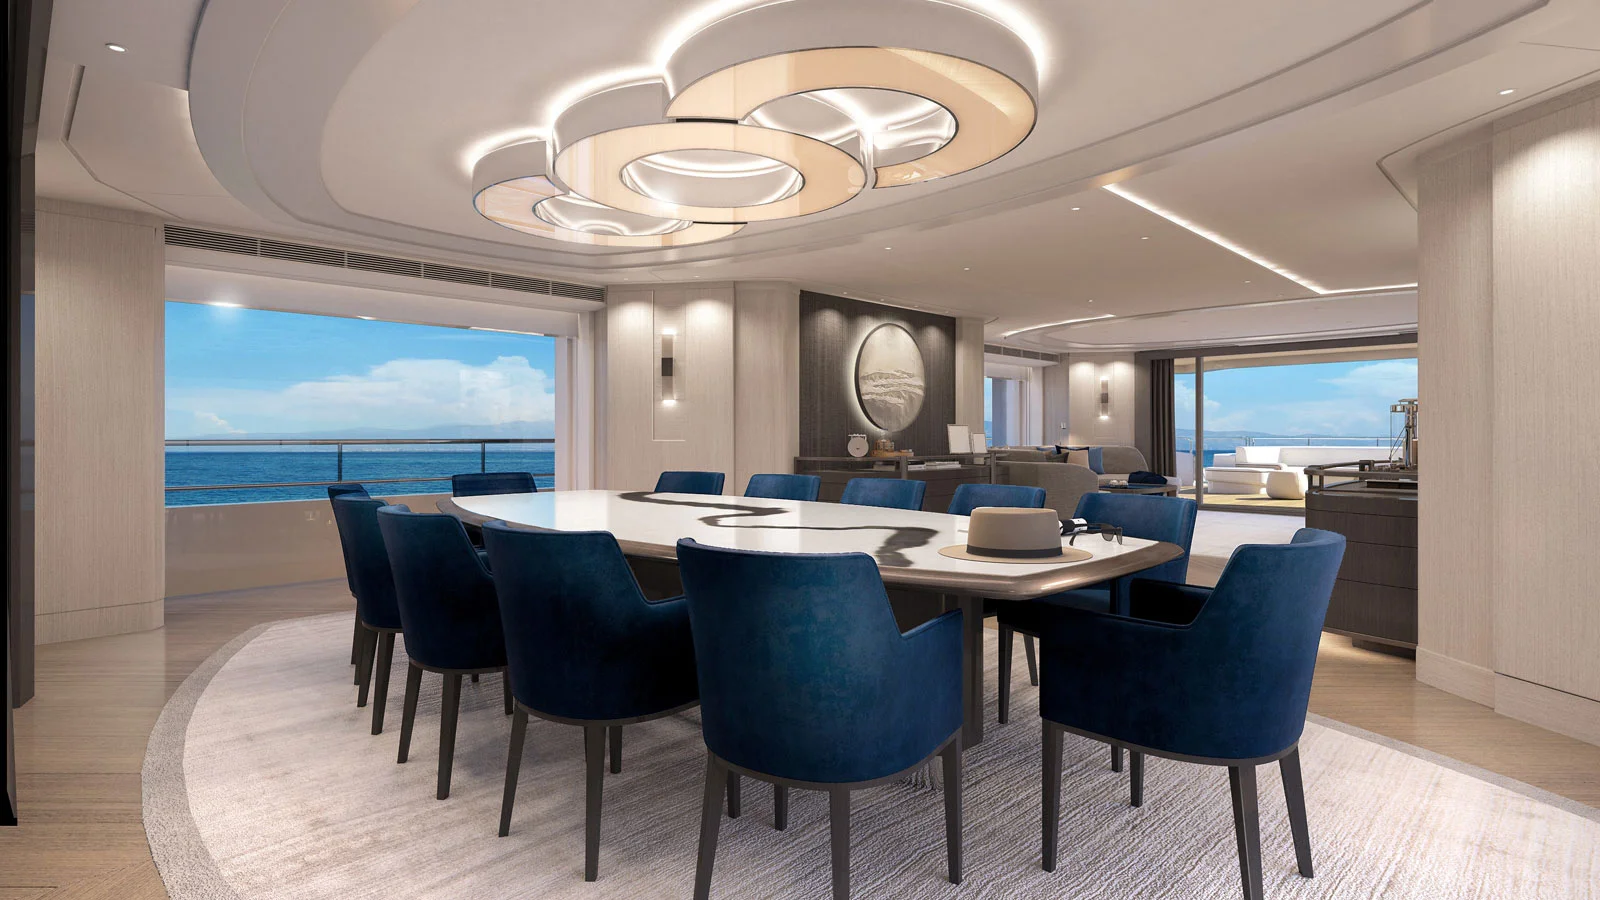 Dining area on the main deck